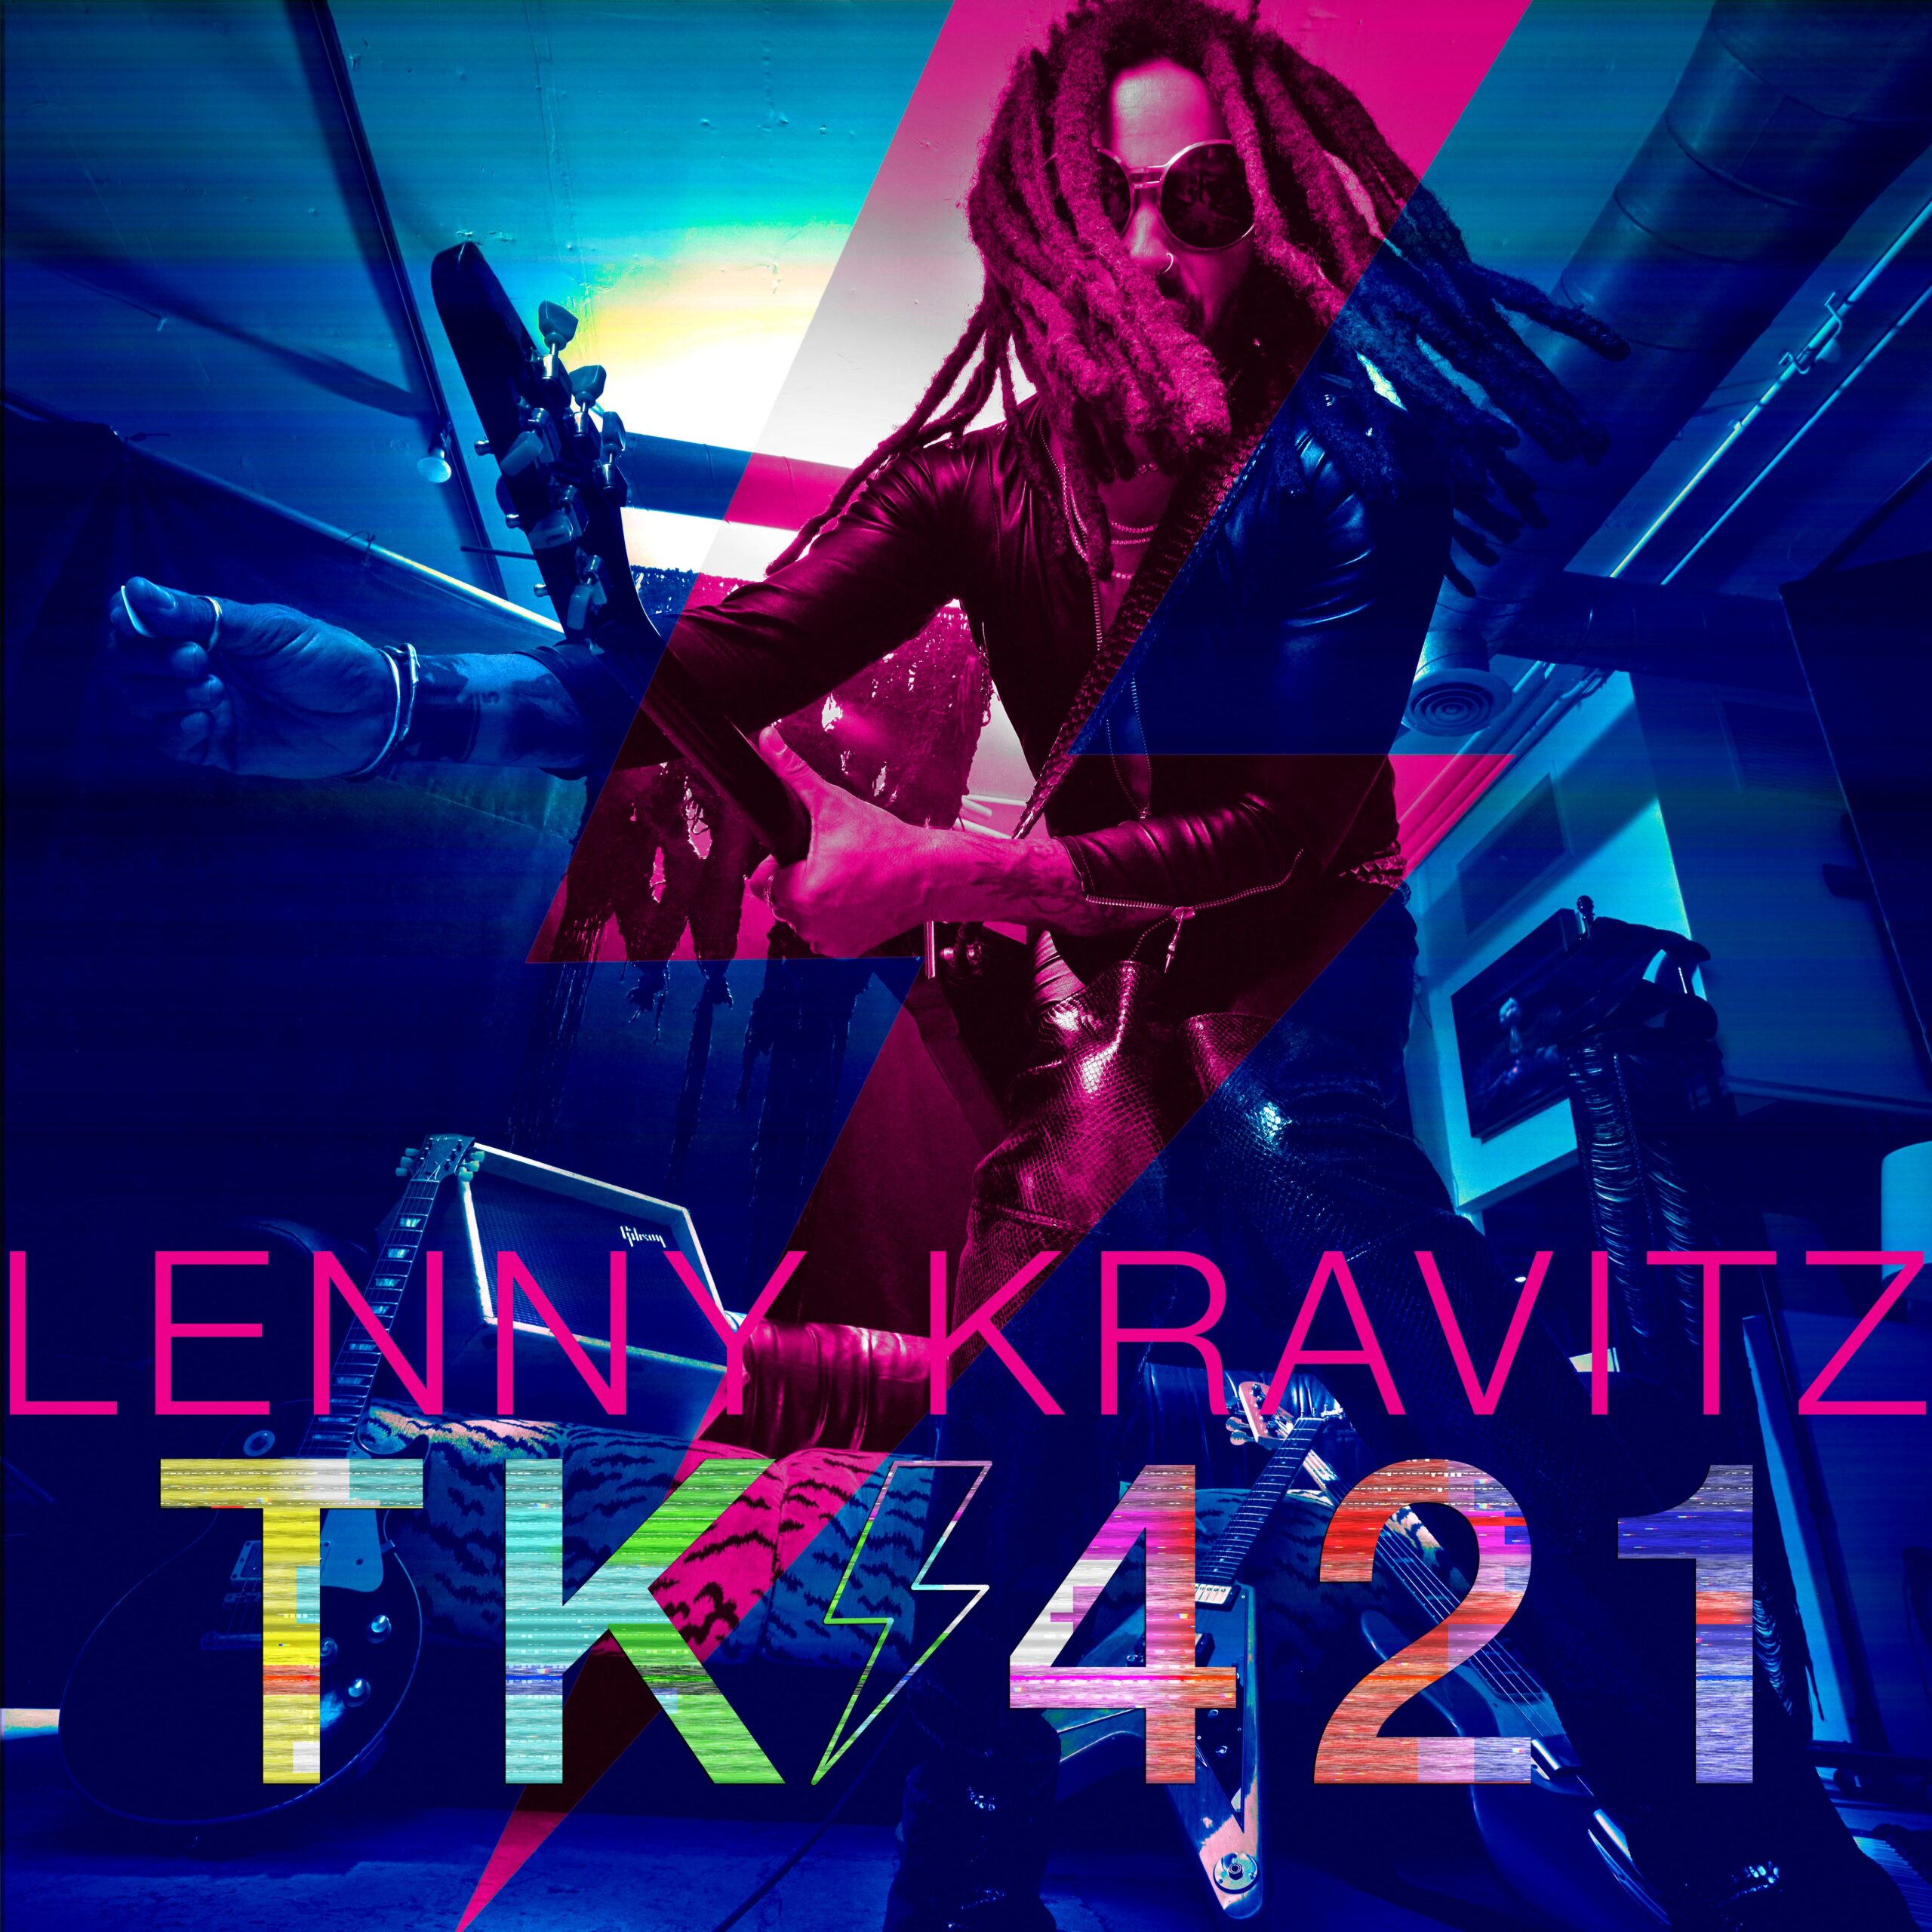 NEWS LENNY KRAVITZ DROPS NSFW VIDEO FOR “TK421”. FIRST EVER DOUBLE LP